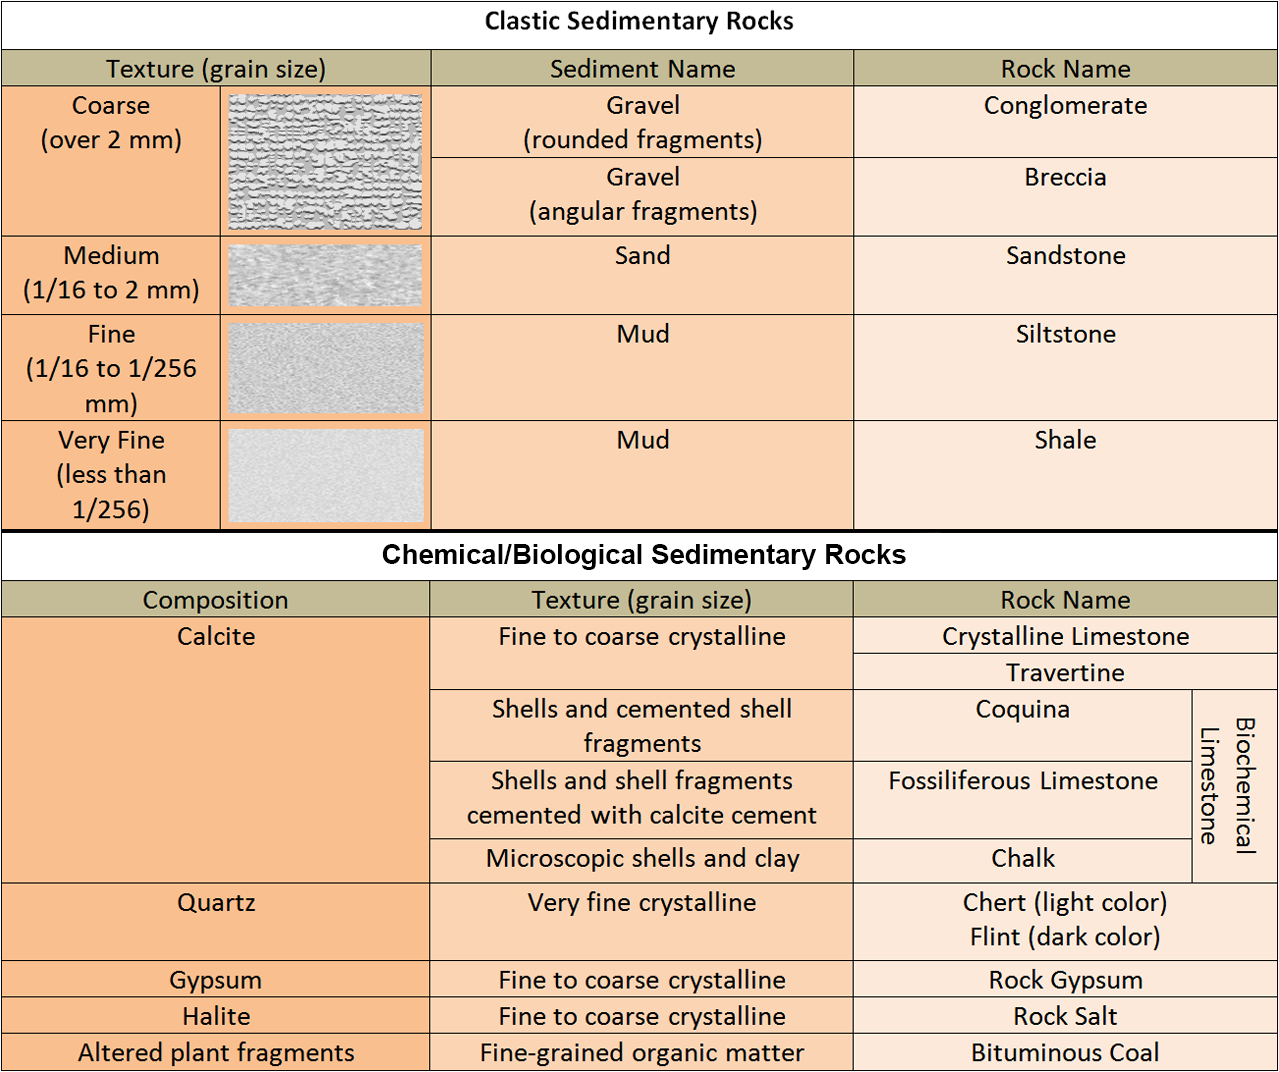 Geology on Mars Using stratigraphic columns to tell the story of Gale